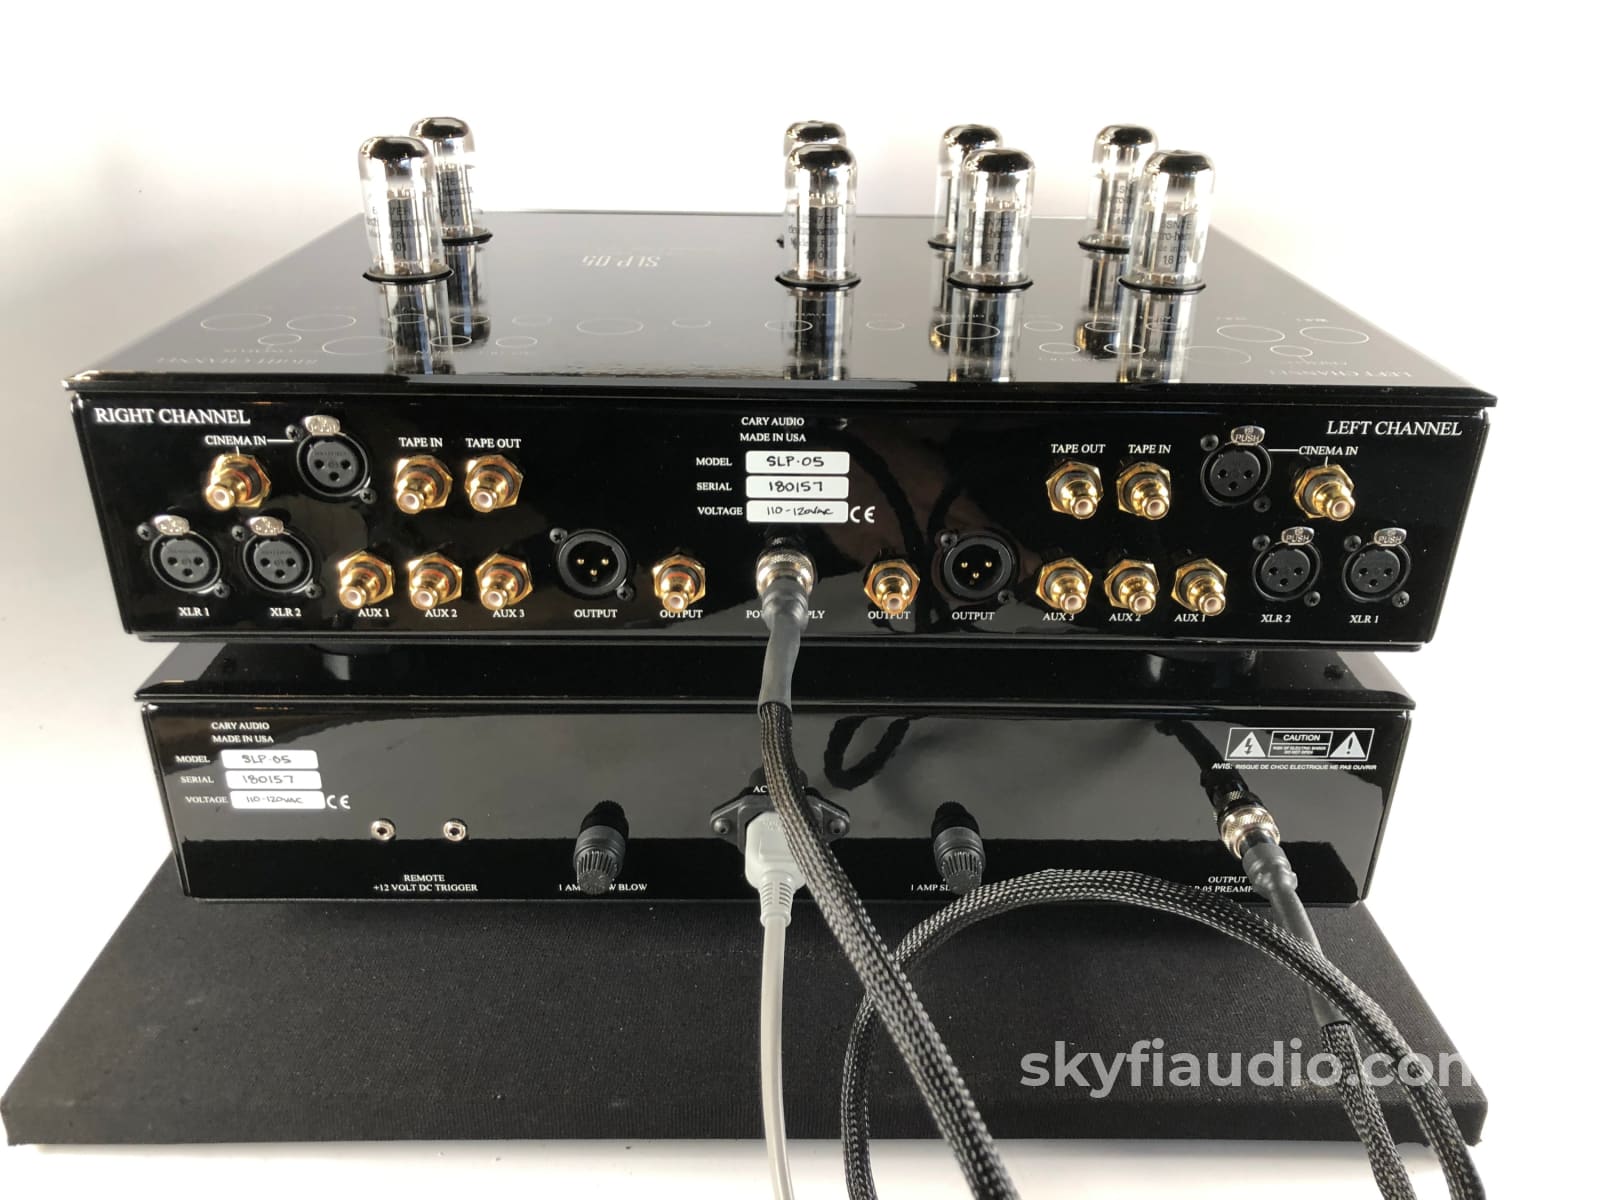 Cary Audio Slp-05 Two Chassis Tube Preamp - Complete And Mint Preamplifier